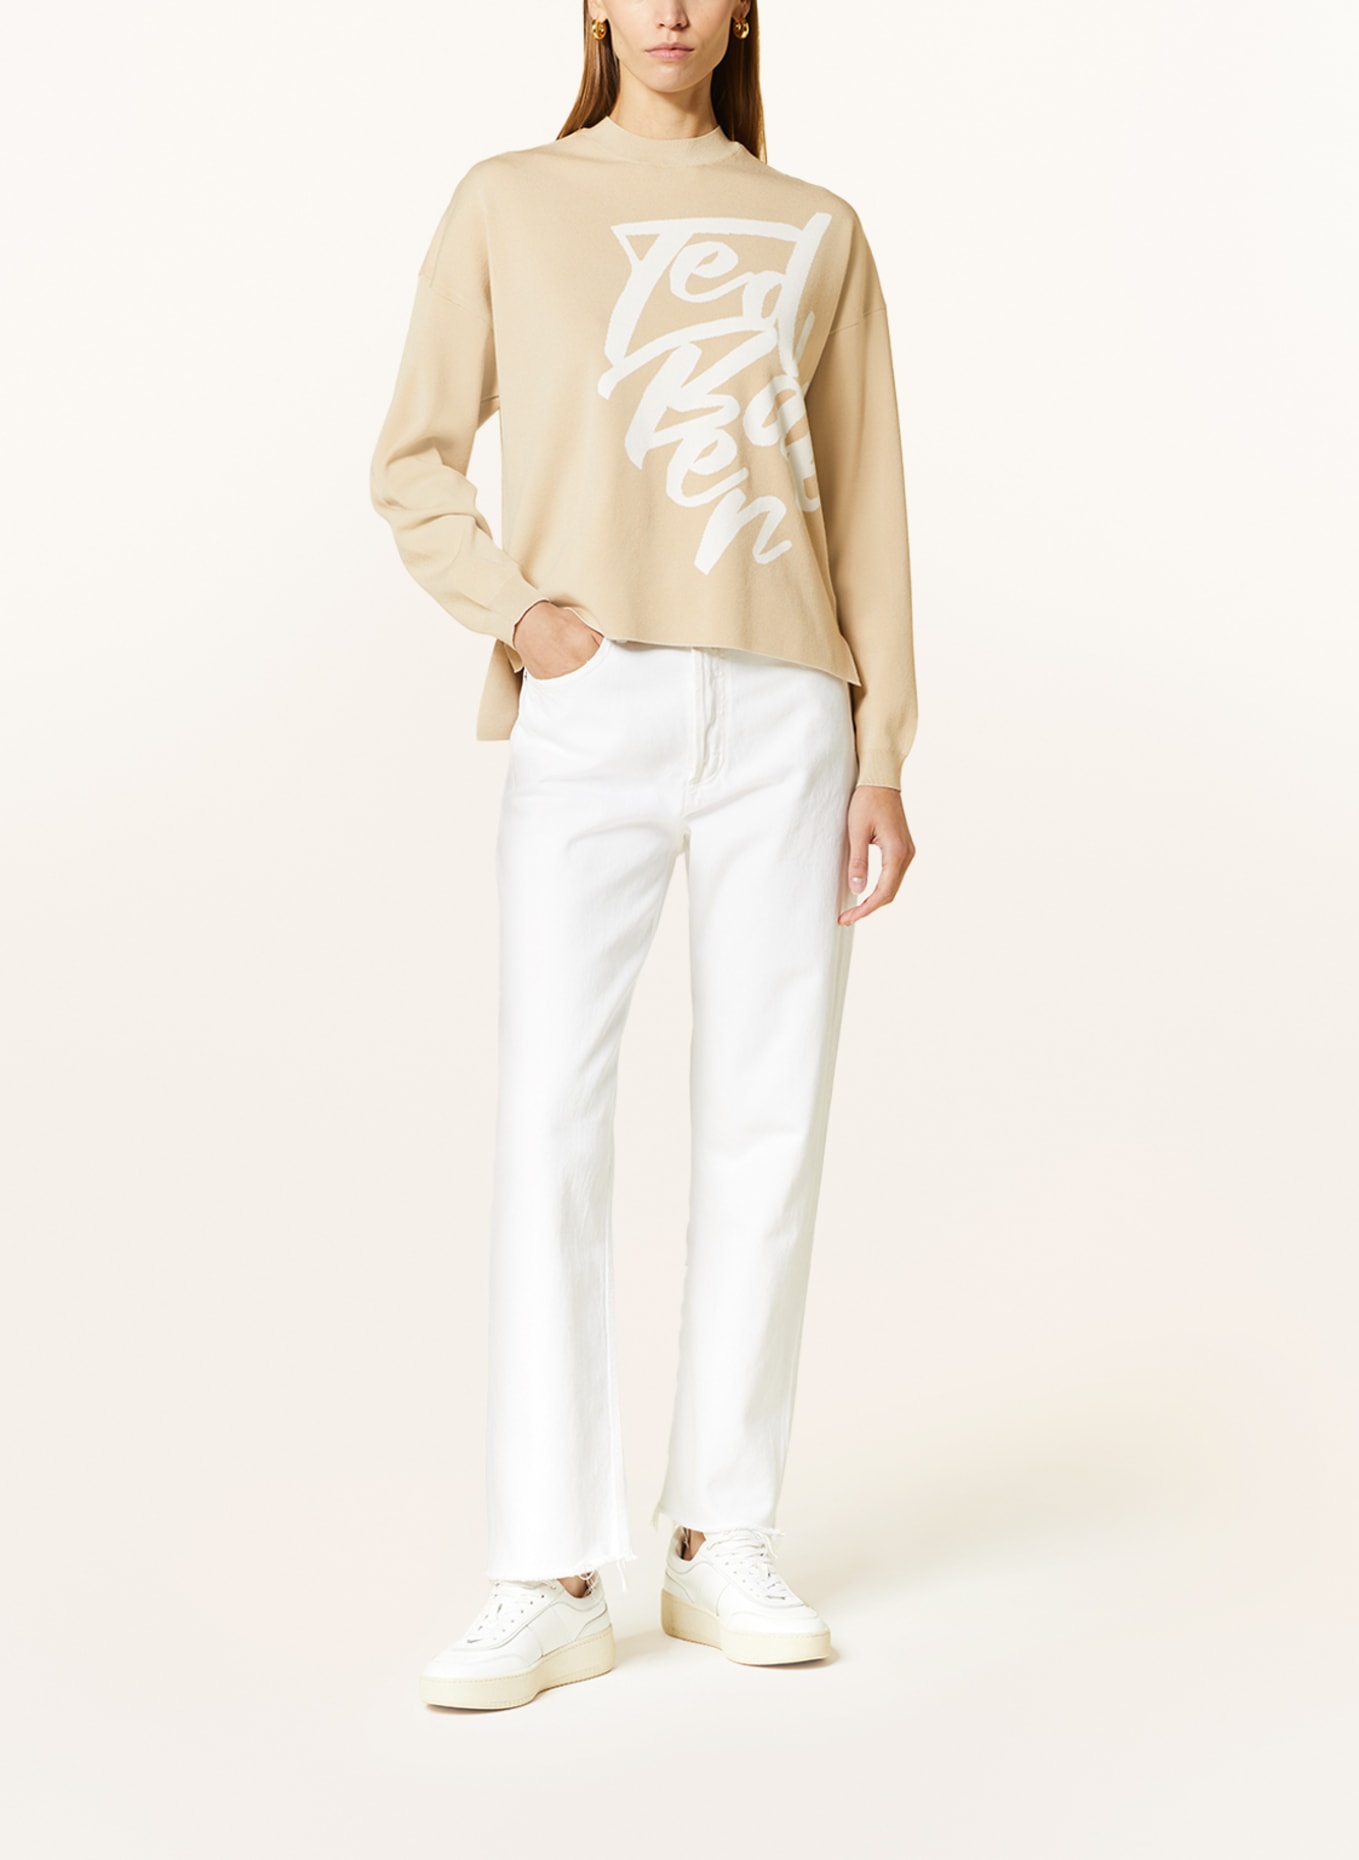 TED BAKER Pullover EMALLLY, Farbe: CREME (Bild 2)